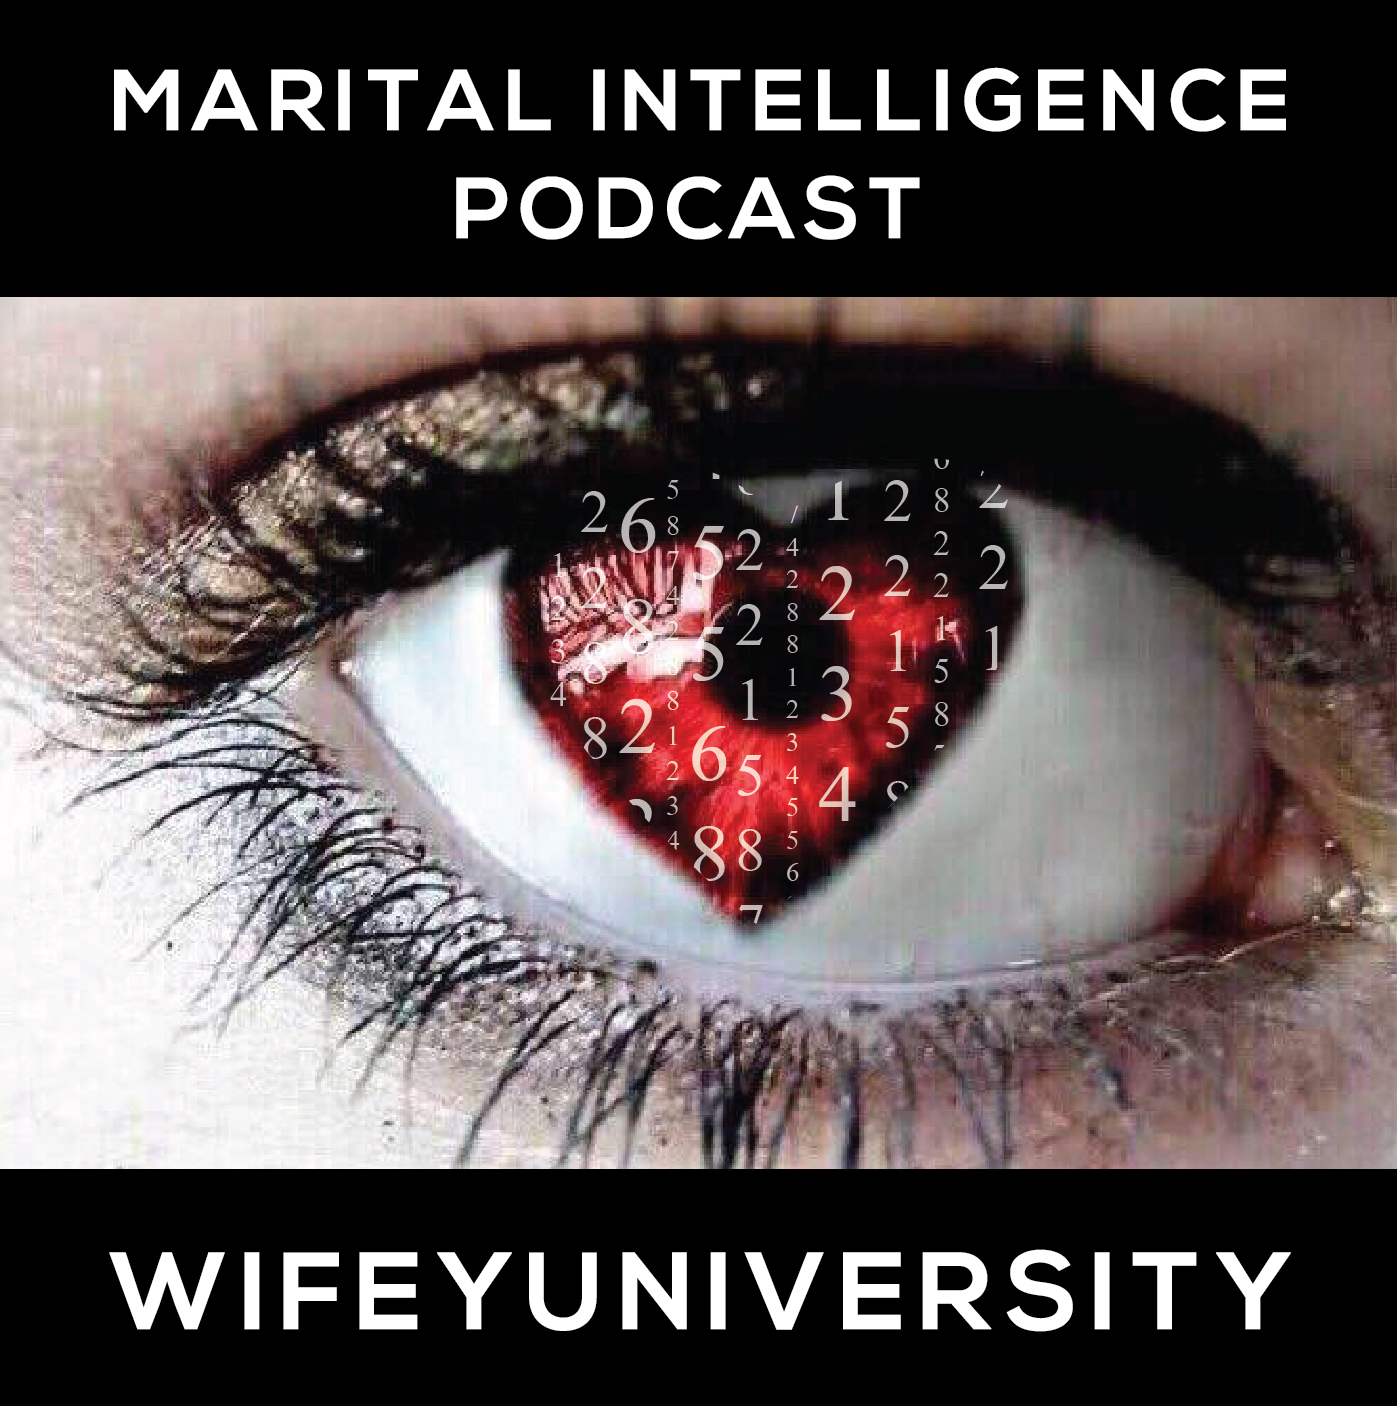 Wifey University Marital Intelligence Podcast Ep_1A   Segment : Ask Wifey University Qs From Wives In The Field With Our Answers/Advice